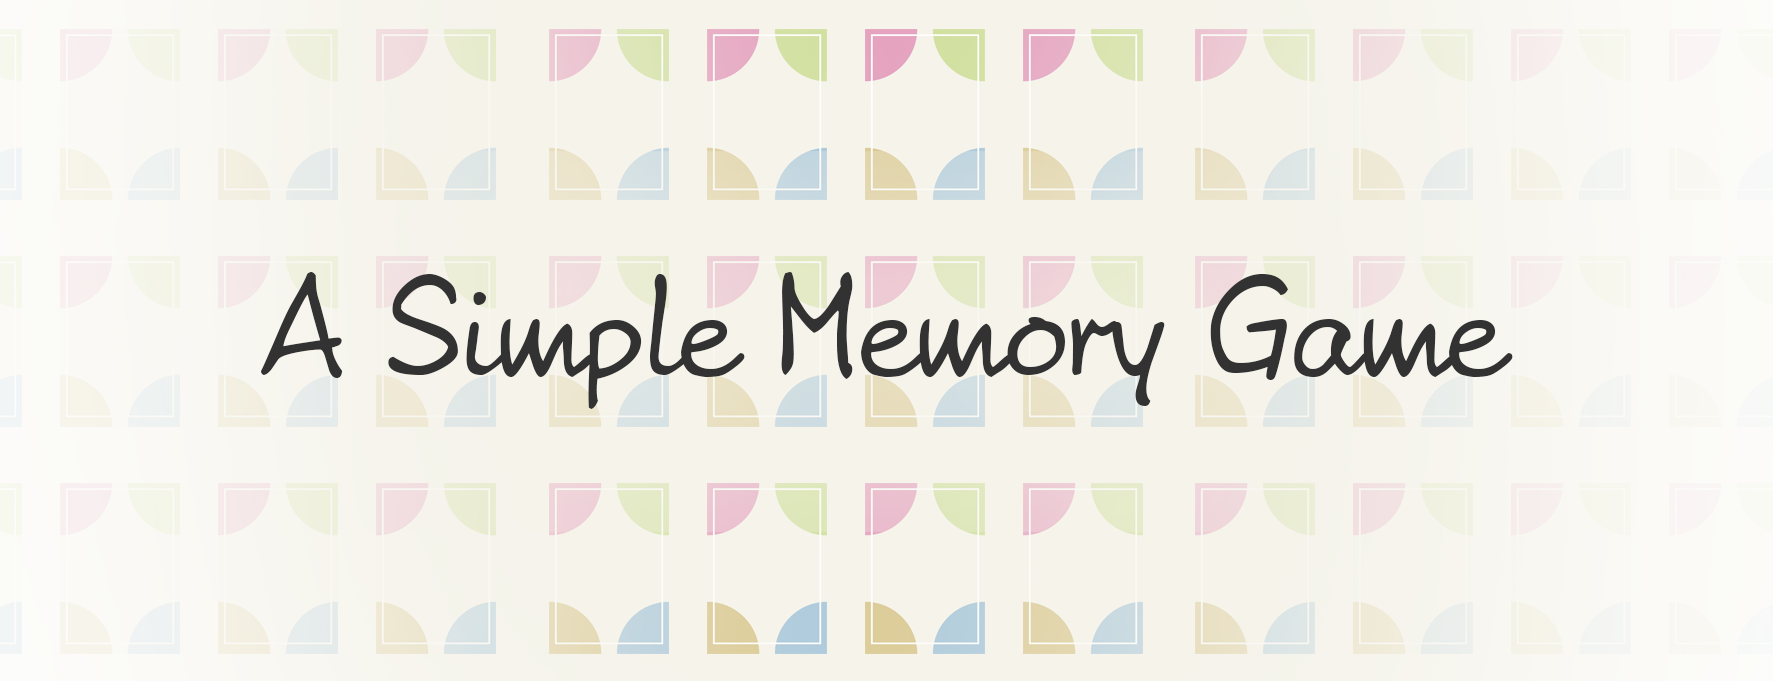 A Simple Memory Game